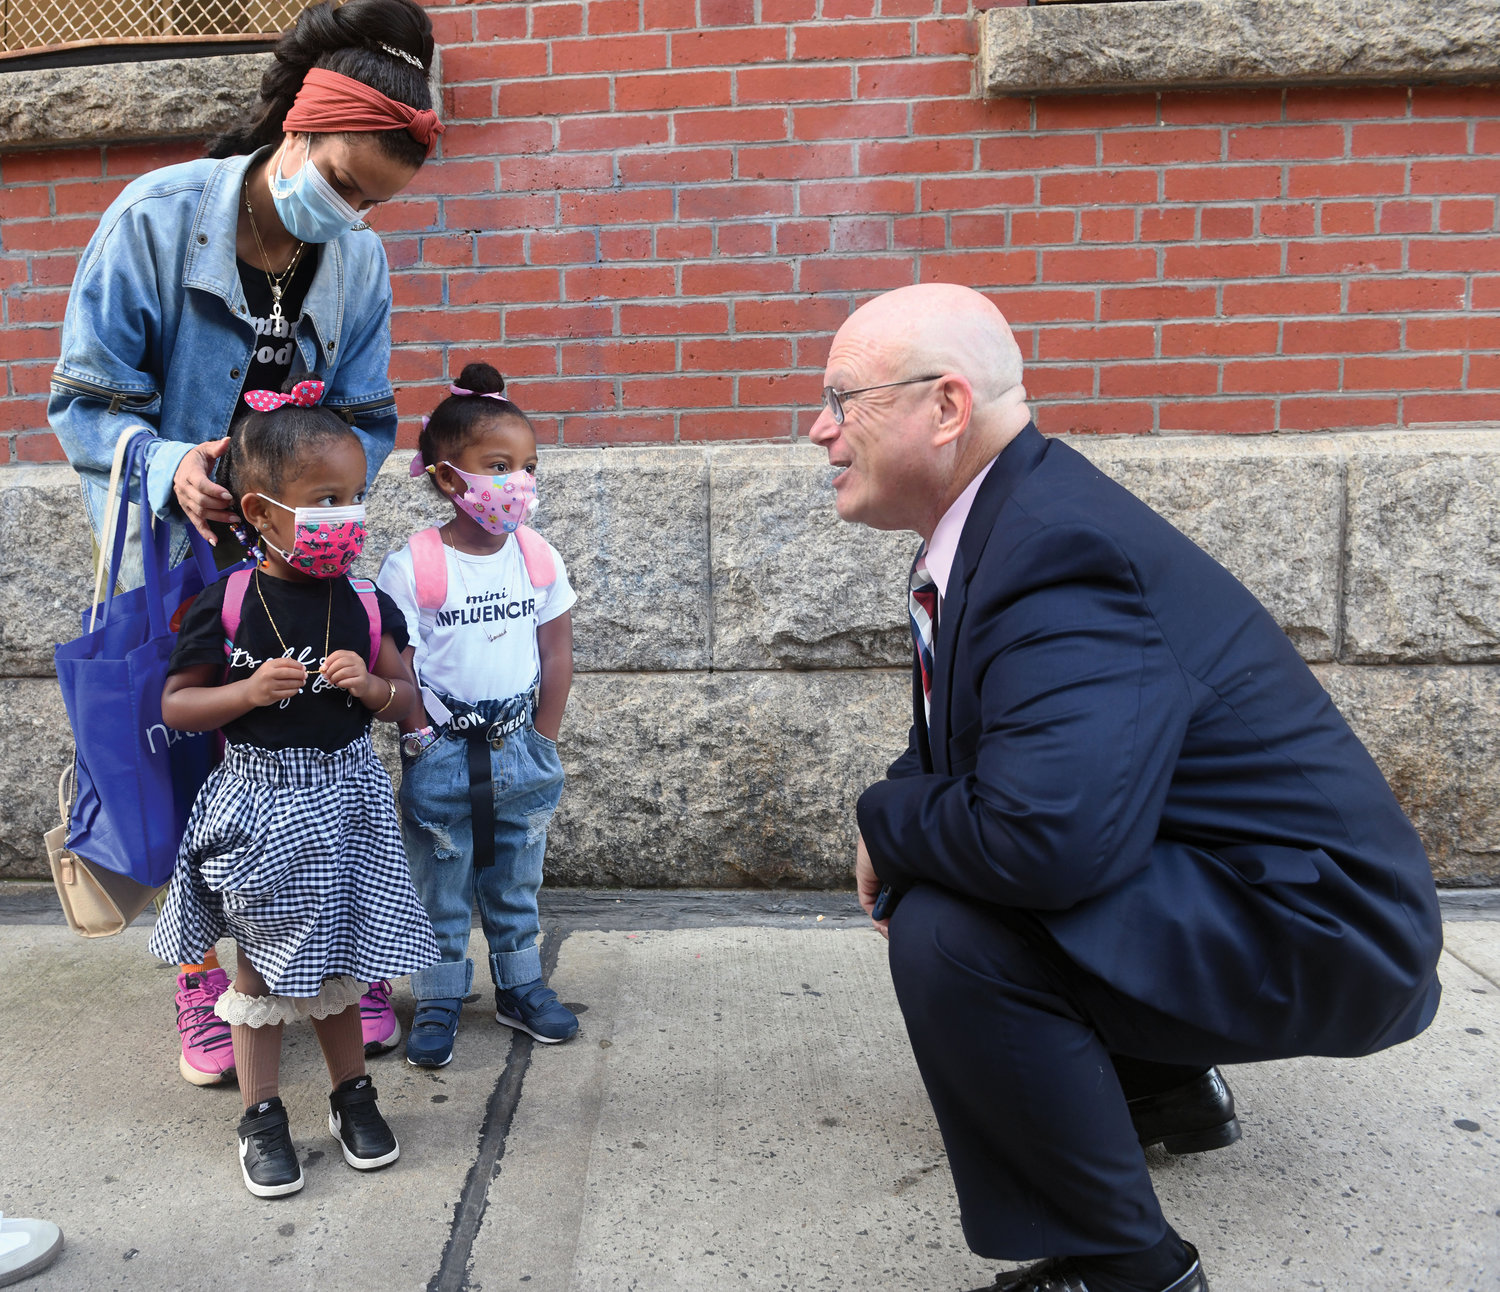 Michael Deegan, superintendent of schools for the archdiocese, greets Shiloh, left, and Amina Washington, white shirt, during the morning drop off at the Academy of St. Paul and St. Ann in East Harlem as the new academic year began last September. The youngsters were returning to start 3K.